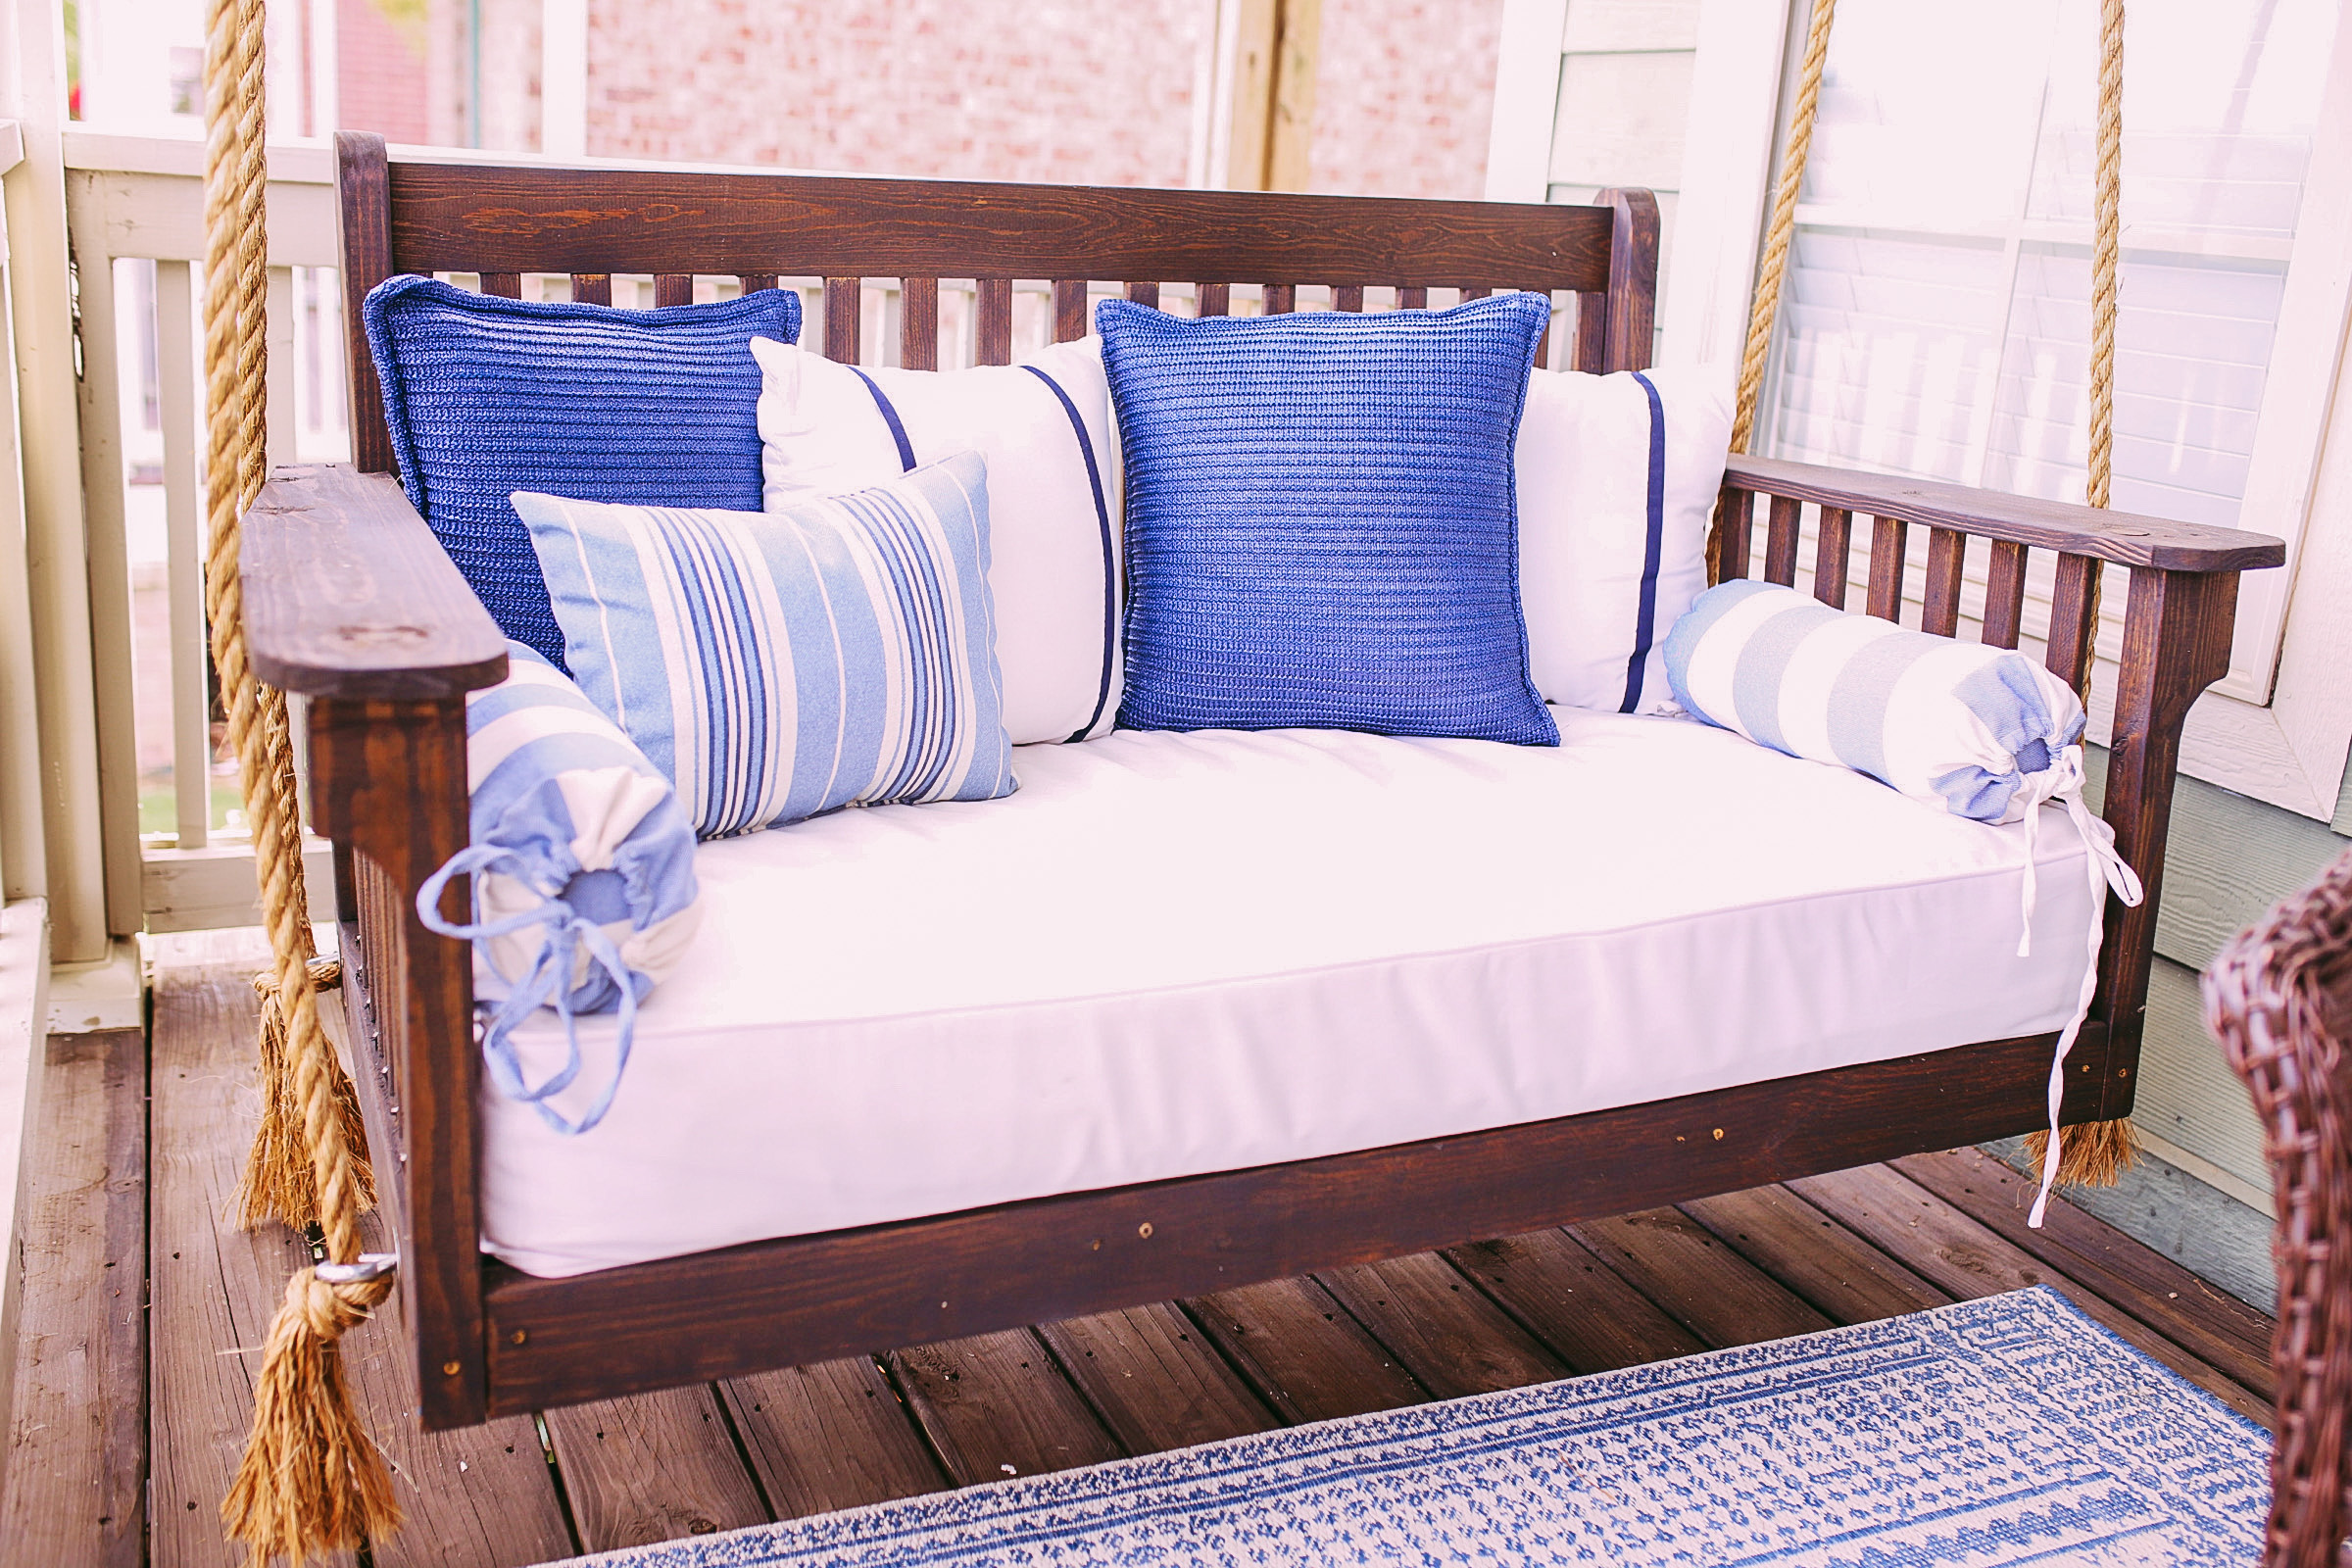 using crib mattress for outdoor seating